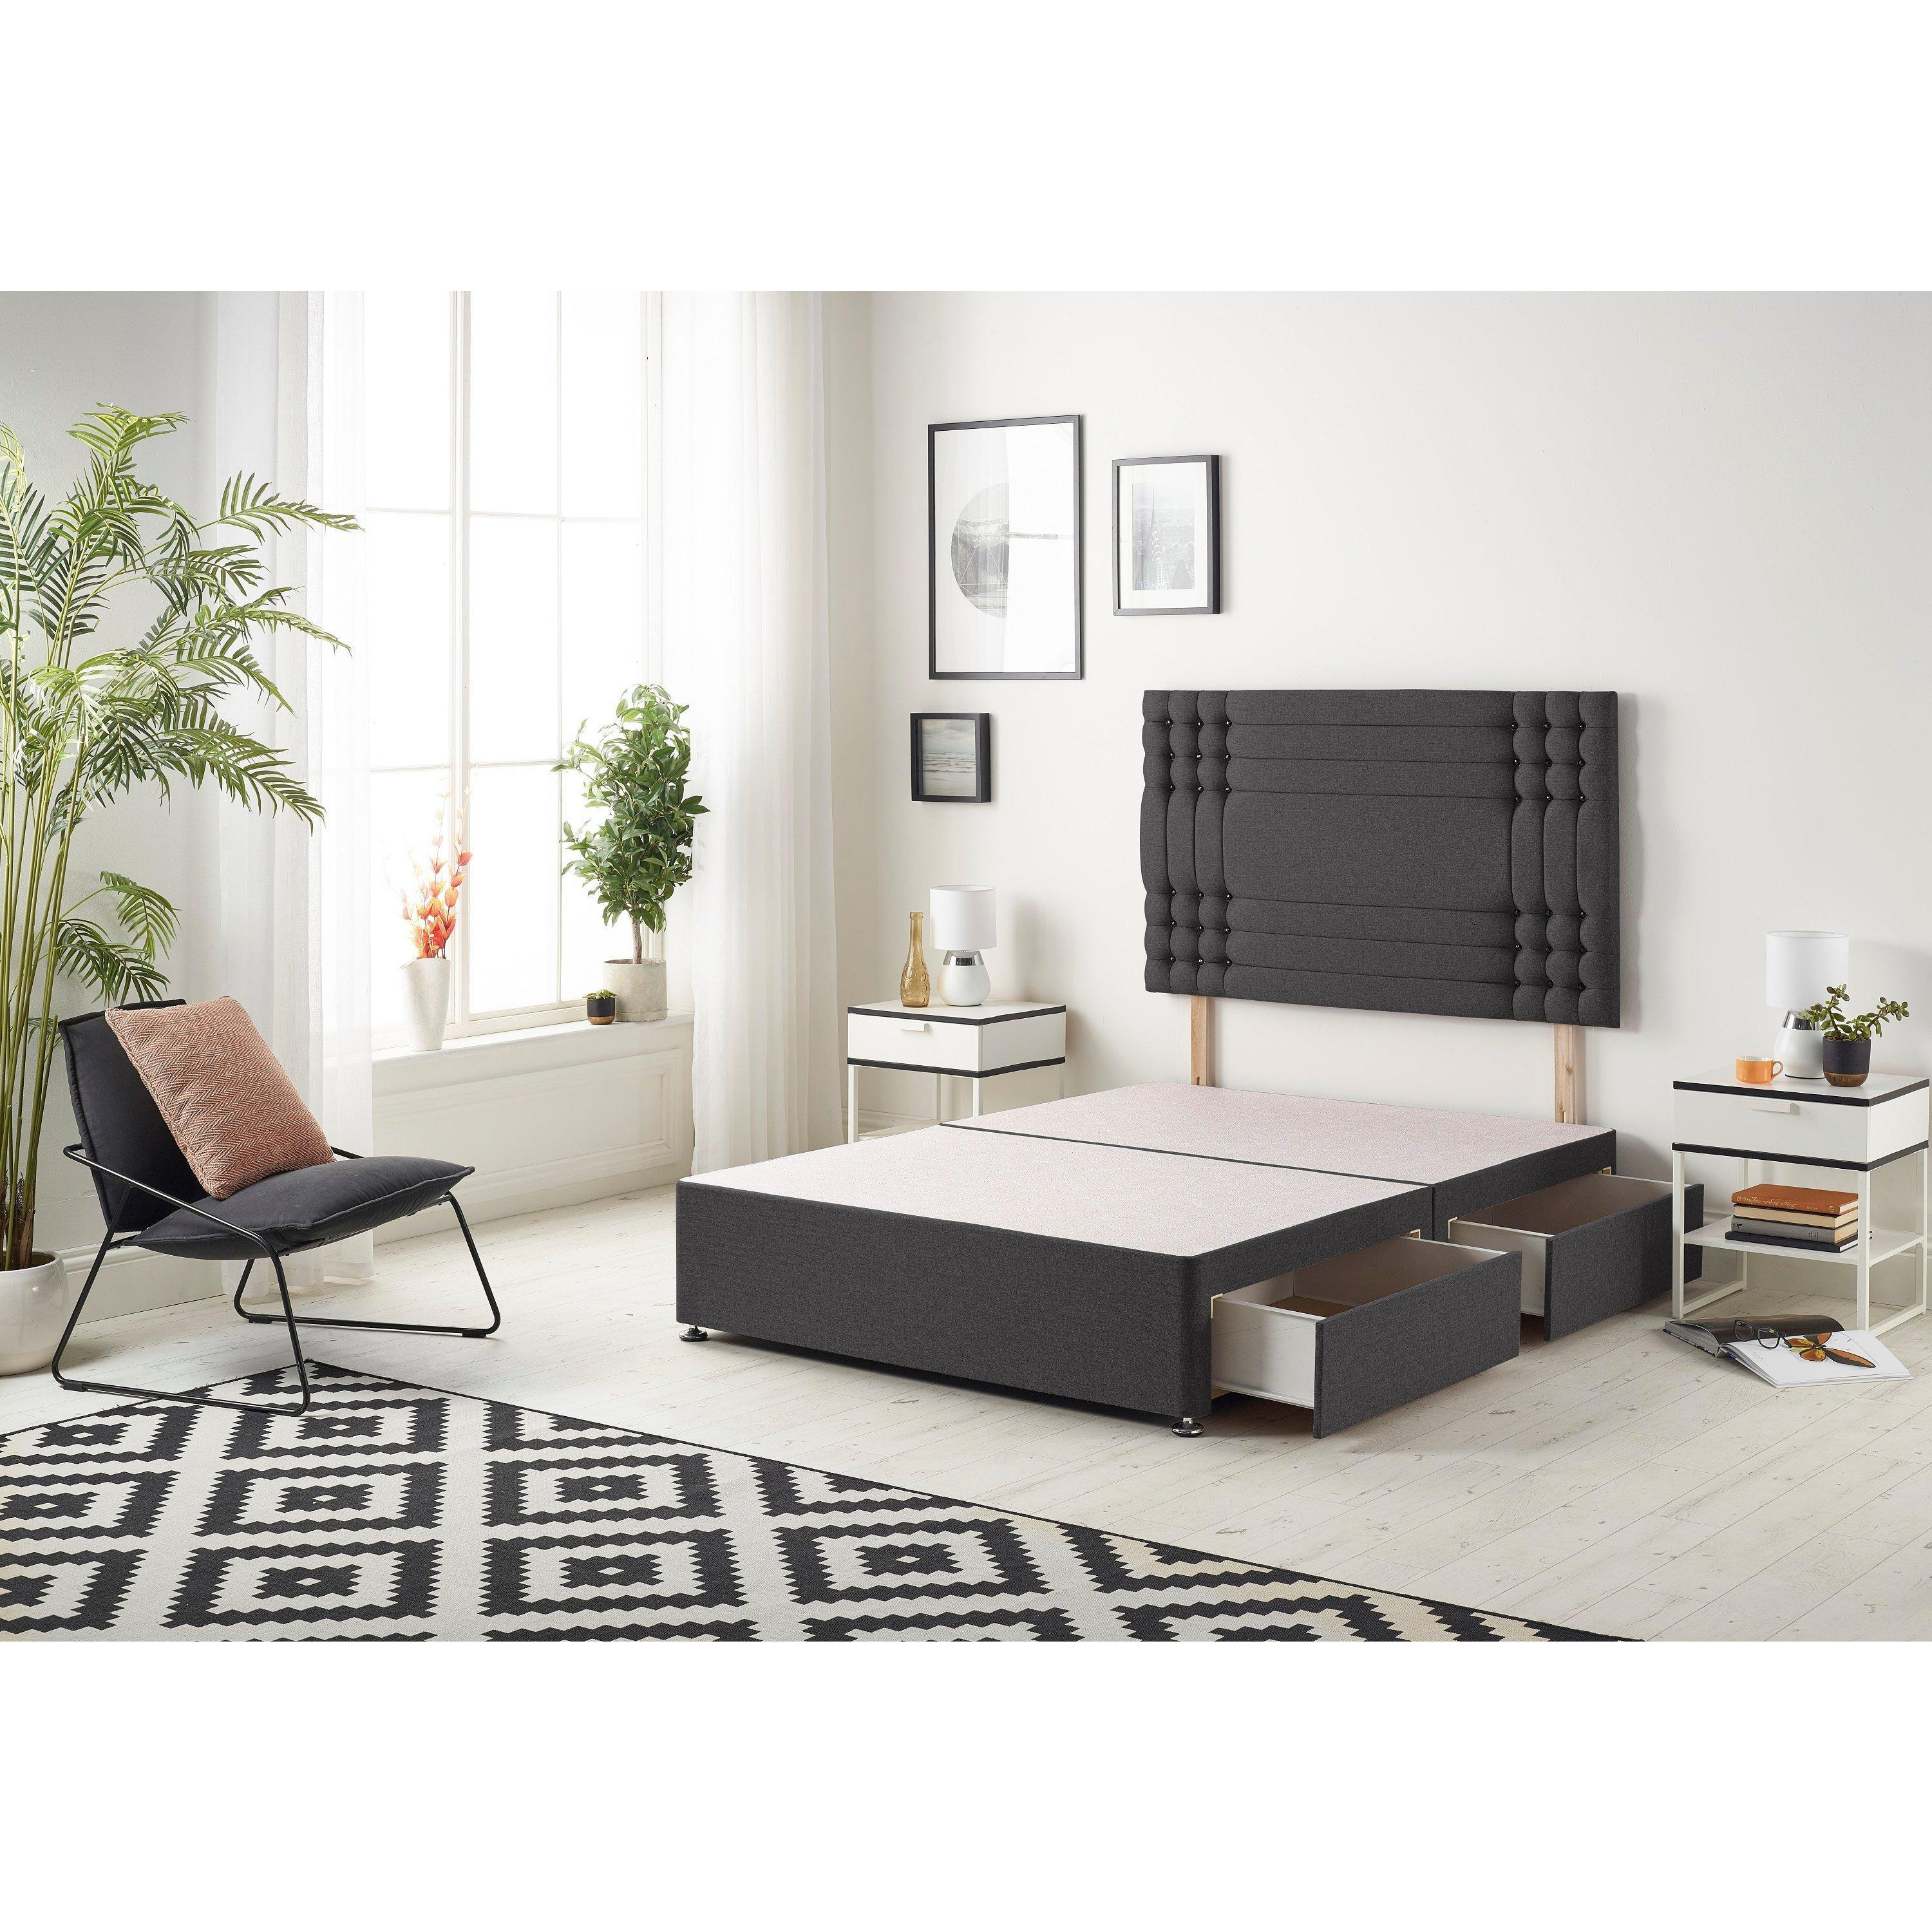 Flexby Divan Bed Base With 2 Drawers and Headboard Plush - image 1